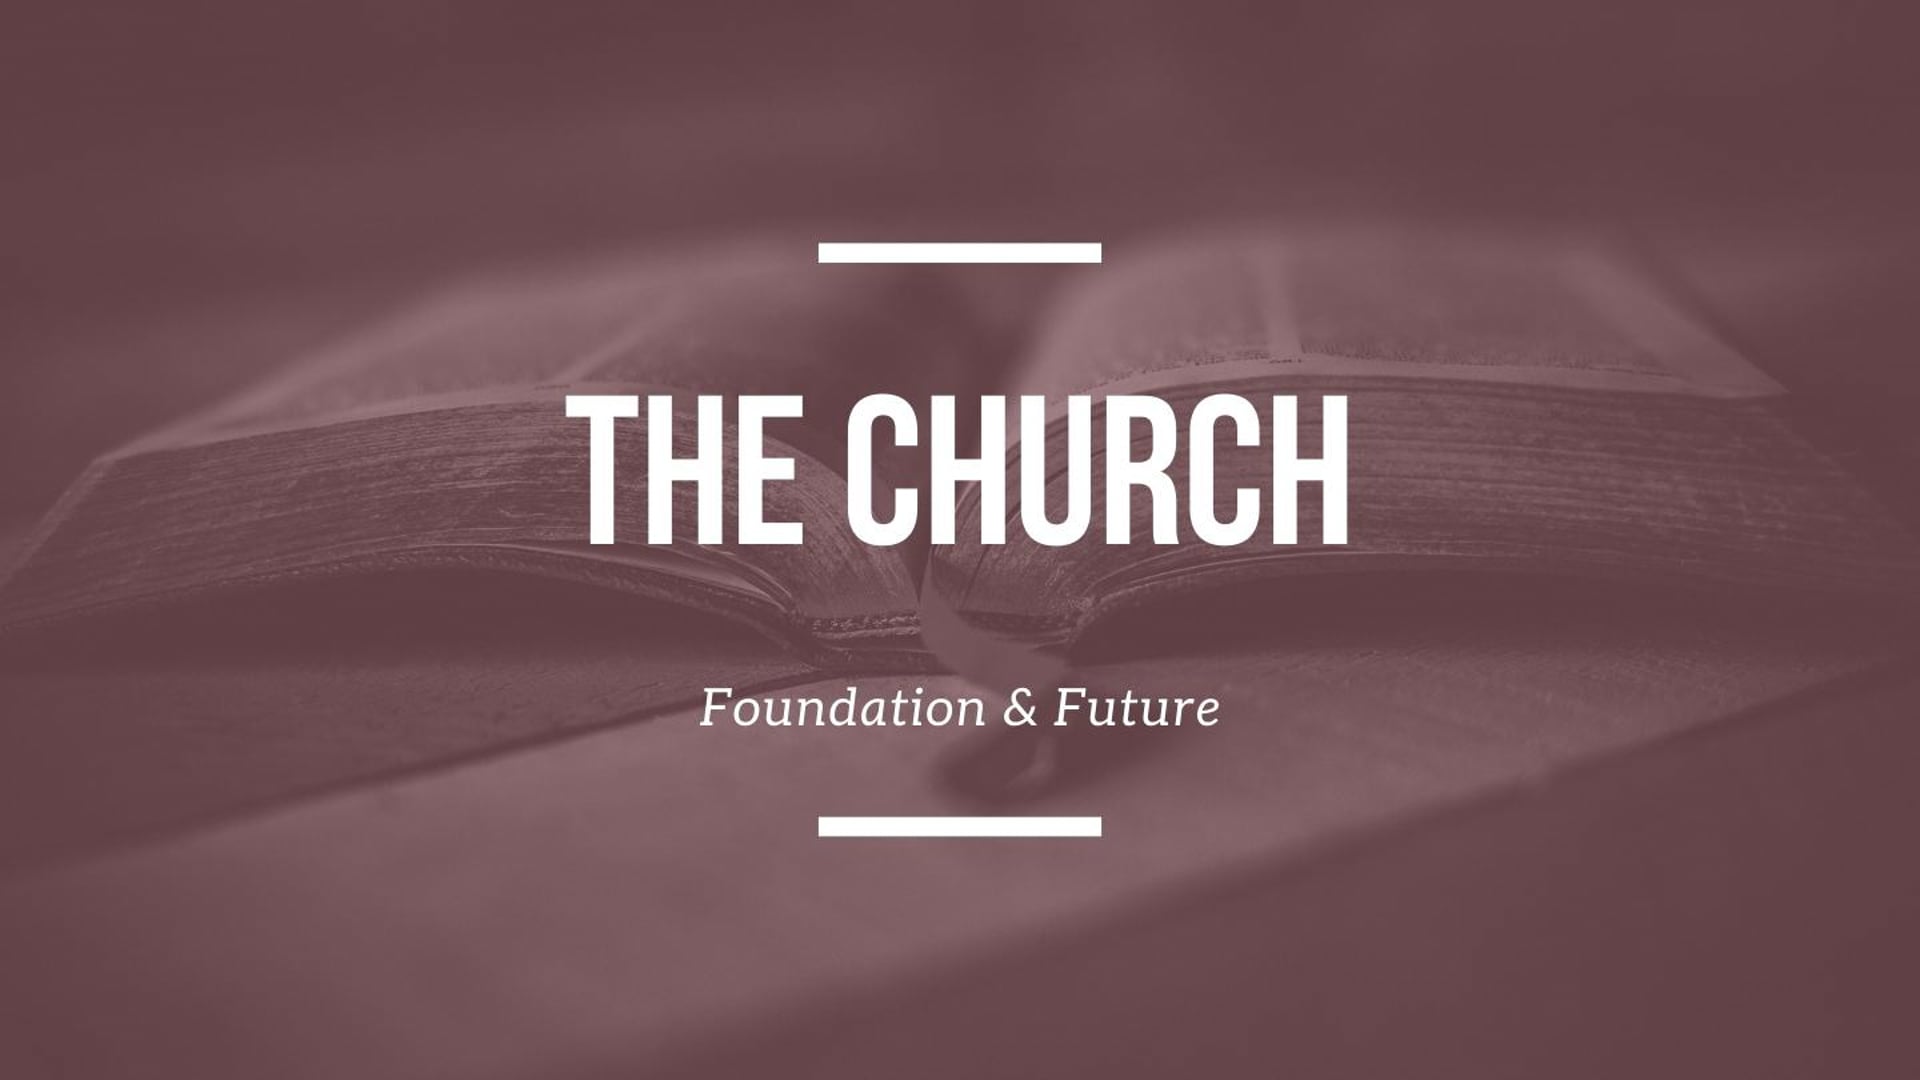 1.16.22 | What Does The Church Do?